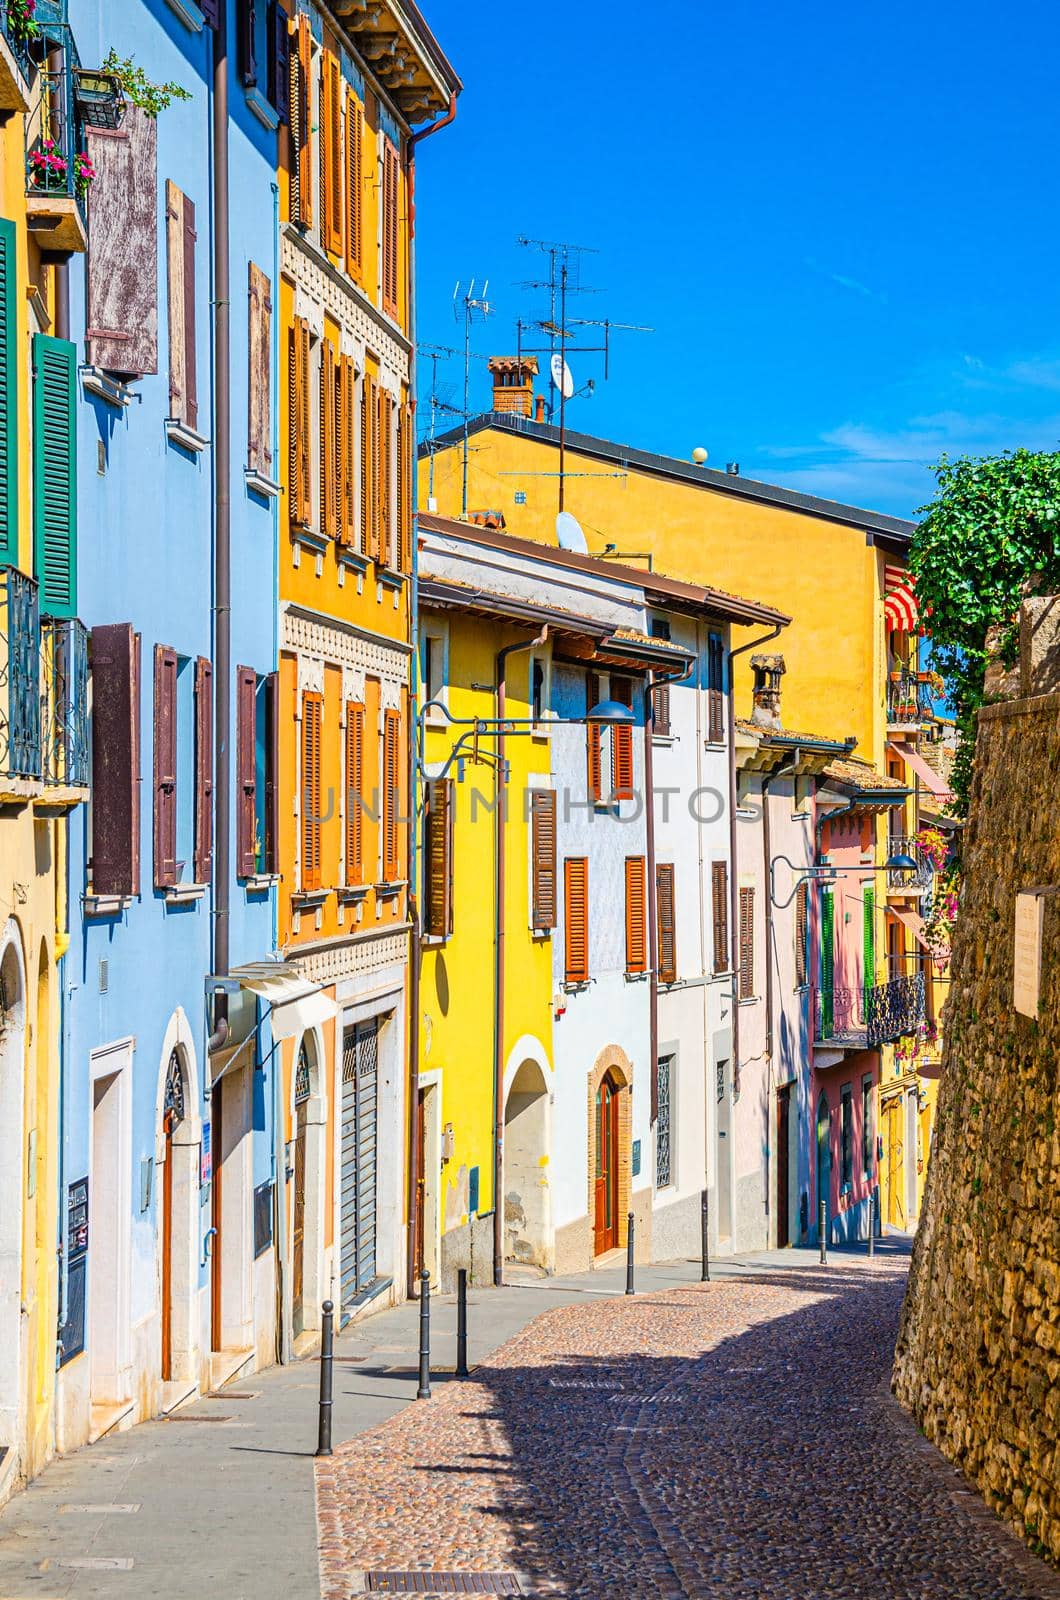 Typical narrow street in old historical centre of Desenzano del Garda town with cobblestone road and traditional colorful buildings with shutter windows, vertical view, Lombardy, Northern Italy